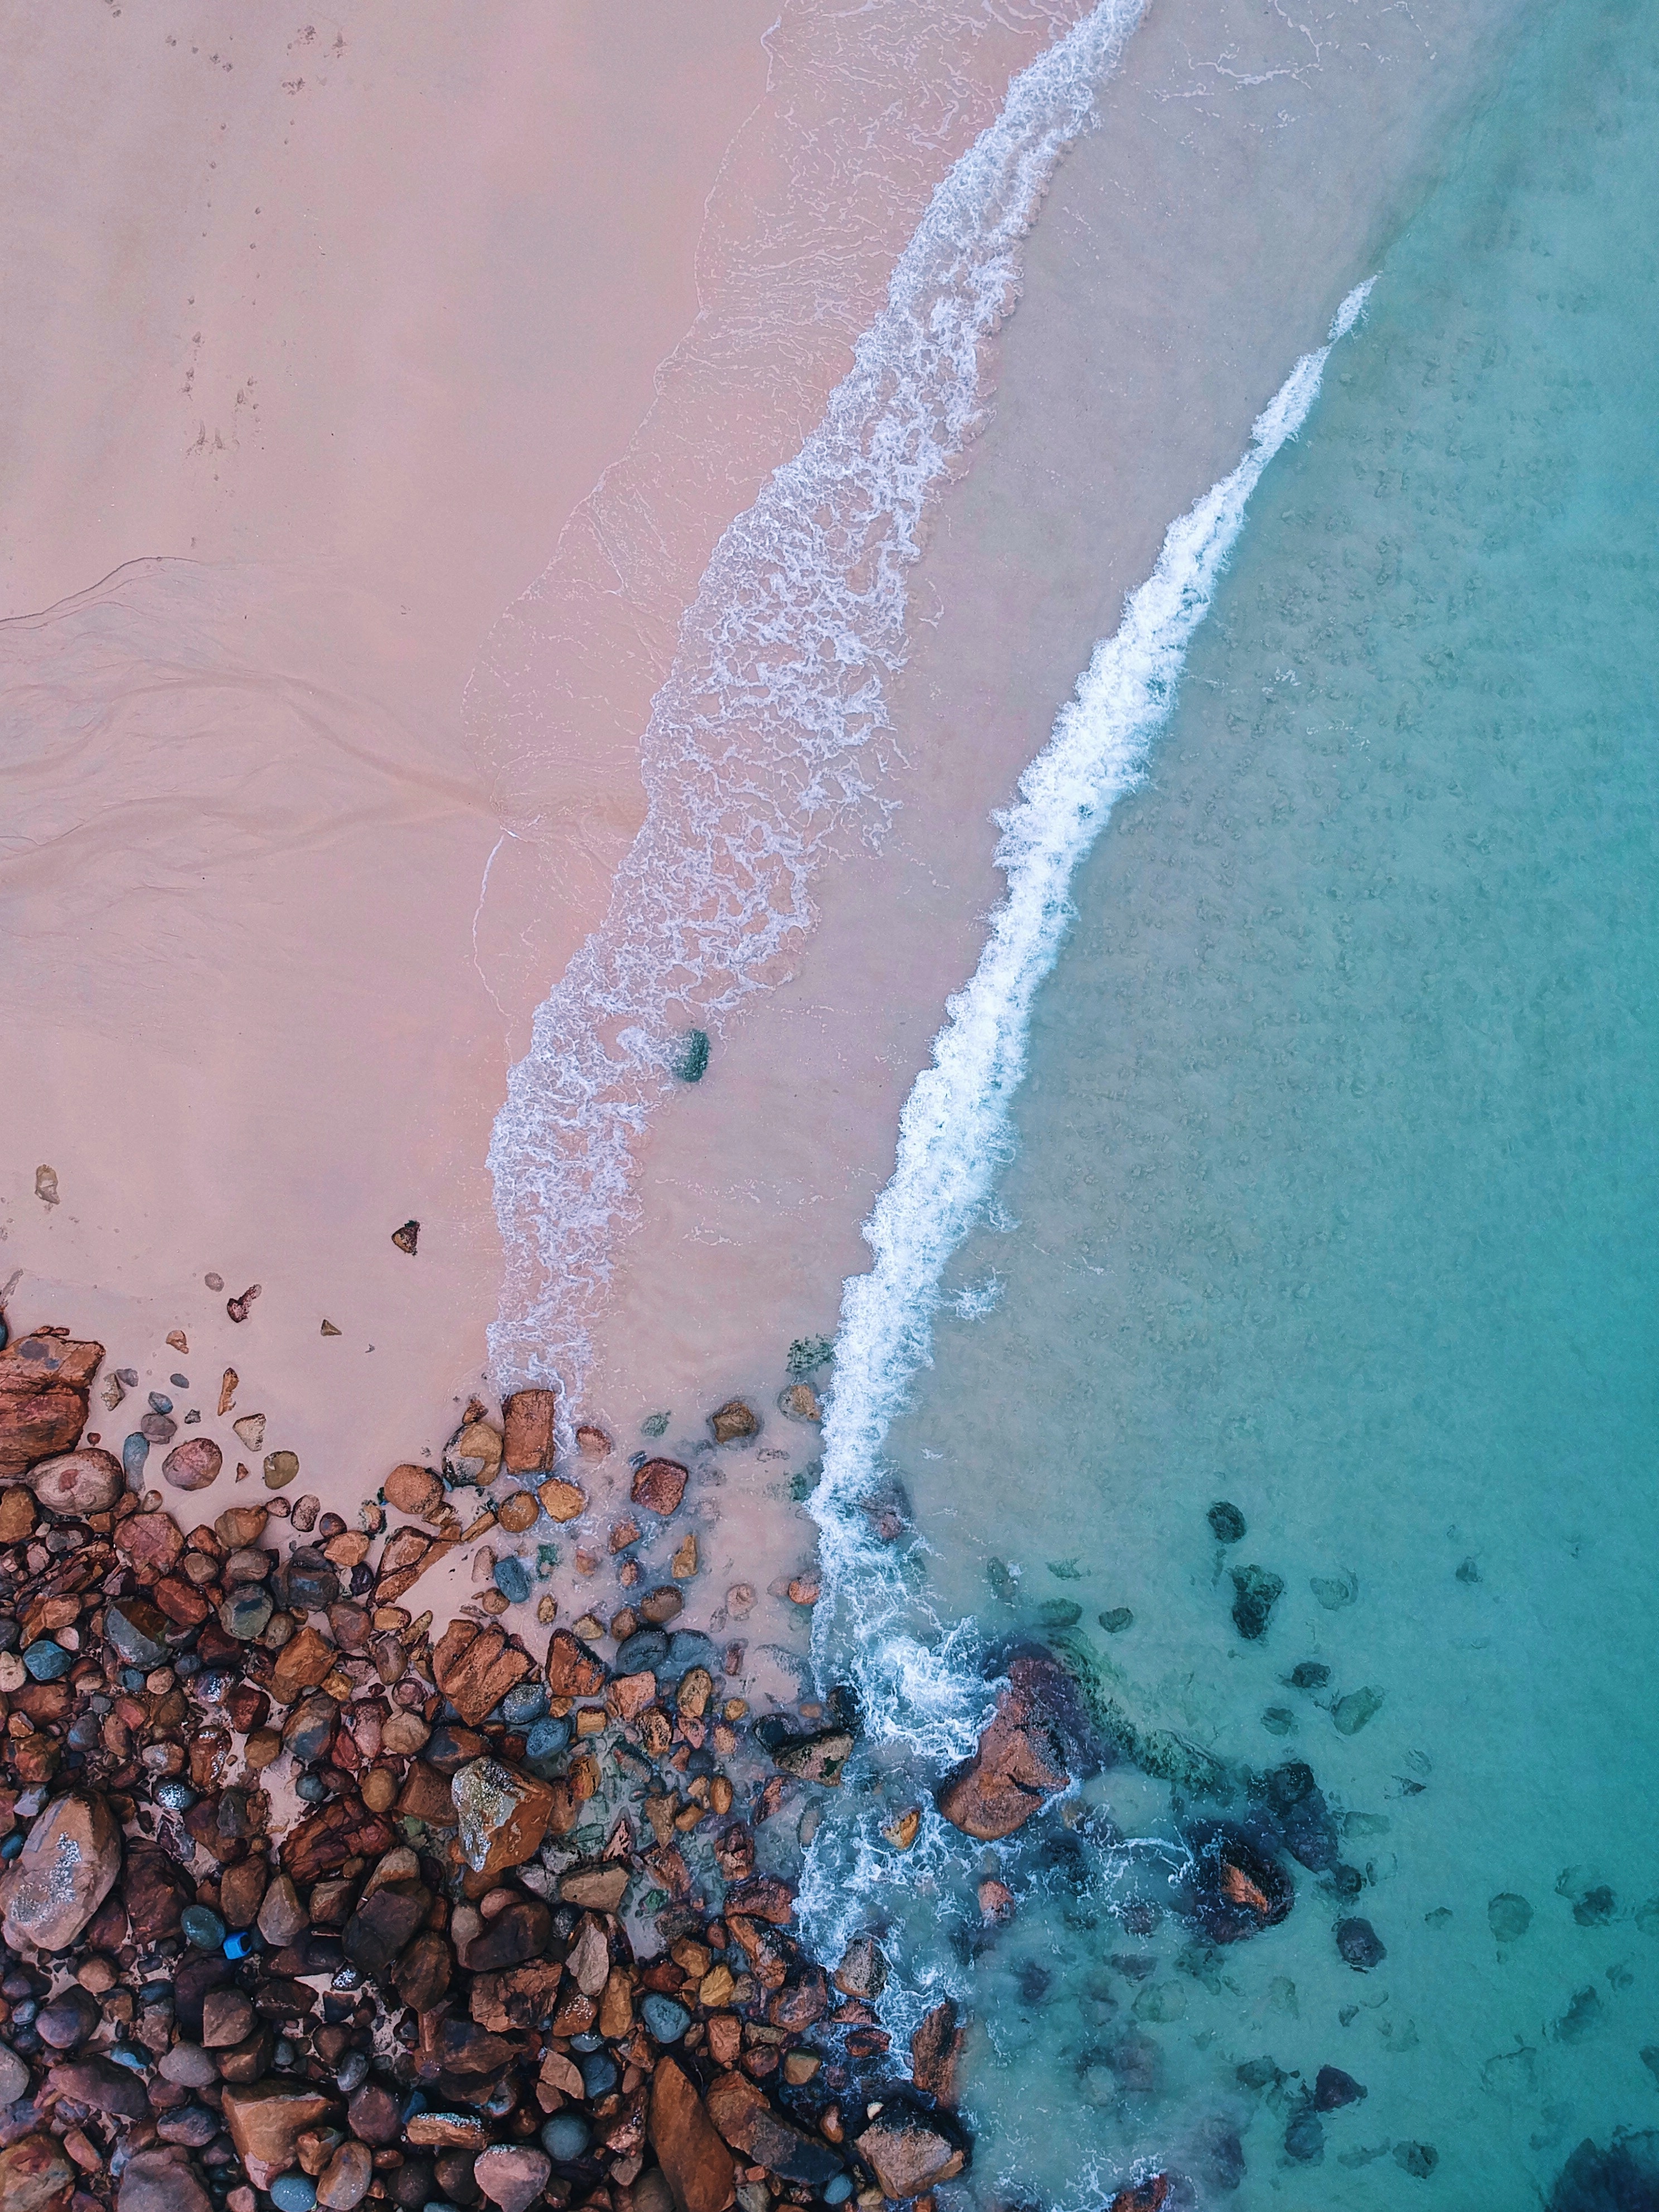 view from above, nature, beach, ocean, surf, sand, stones, foam